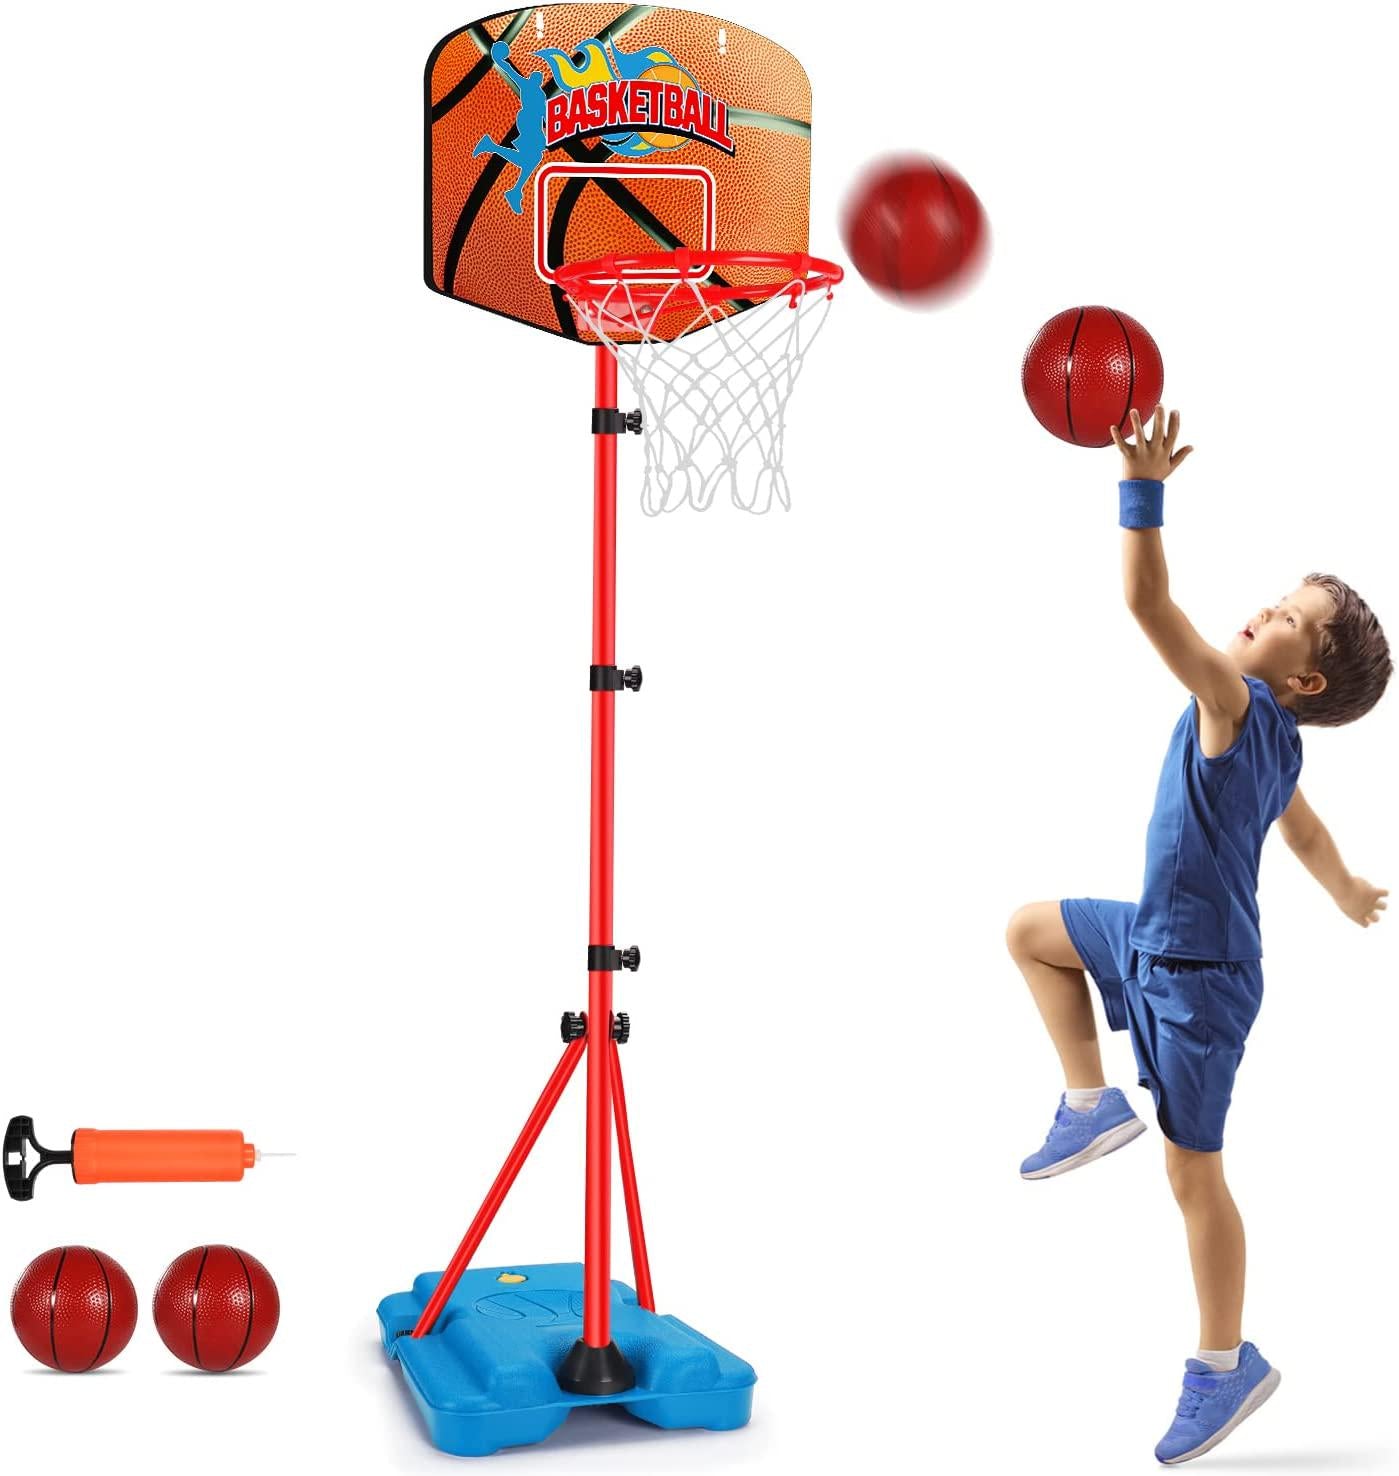 Auggie, Toddler Basketball Hoop Stand Adjustable Height 2.5 ft -5.1 ft Mini Indoor Basketball Goal Toy with Ball Pump for Baby Kids Boys Girls Outdoor Play Sport for Age 2 3 4 5 Years Old